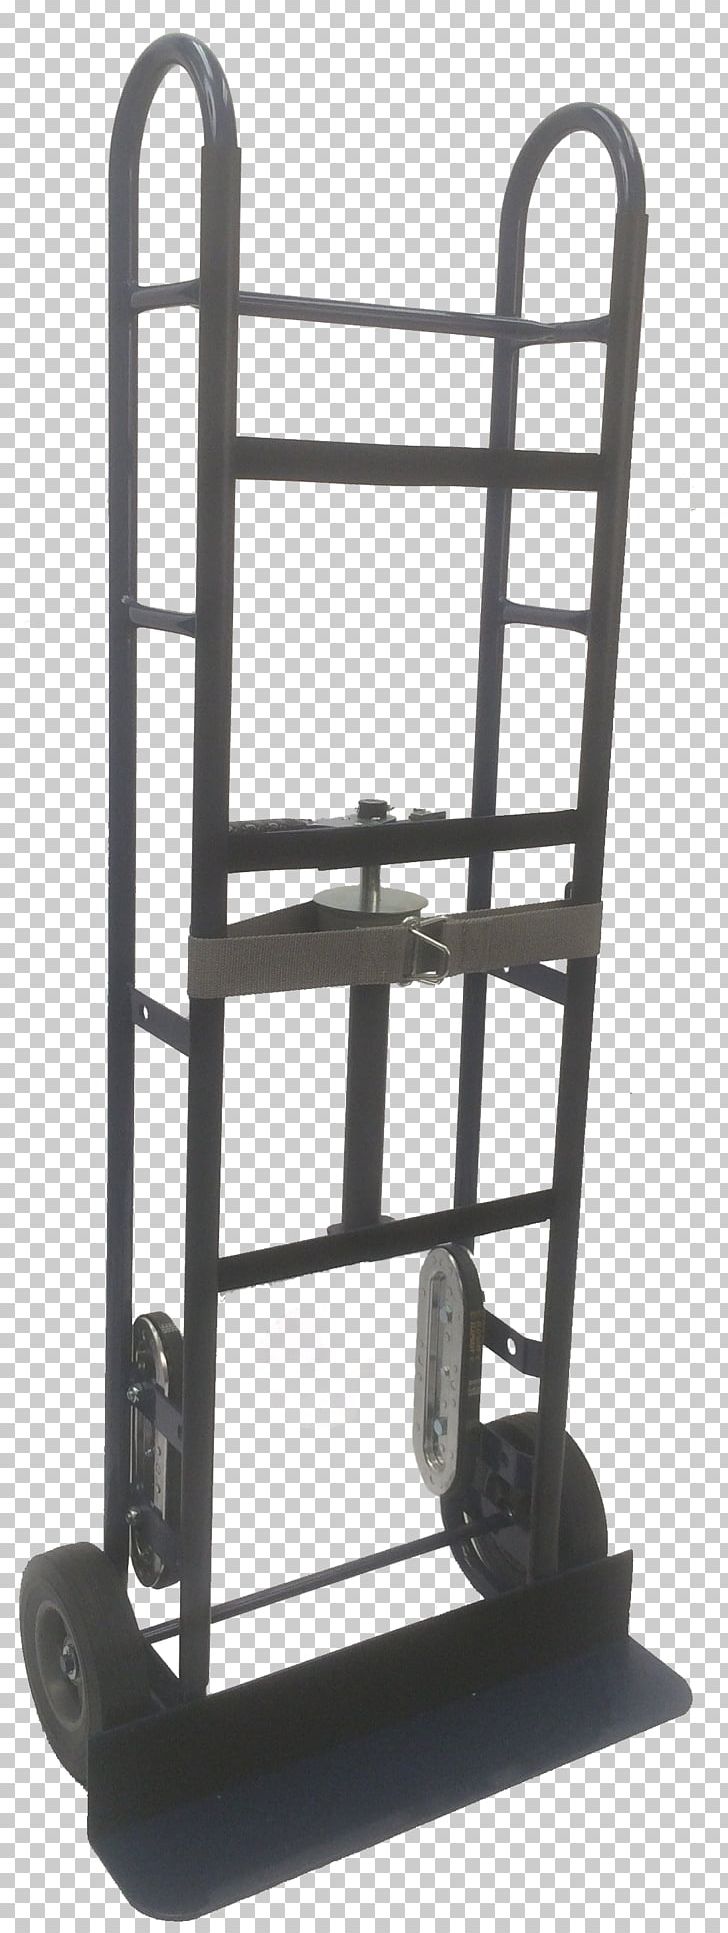 Hand Truck Industry Price PNG, Clipart, Furniture, Hand Truck, Hardware, Home Appliance, Industry Free PNG Download